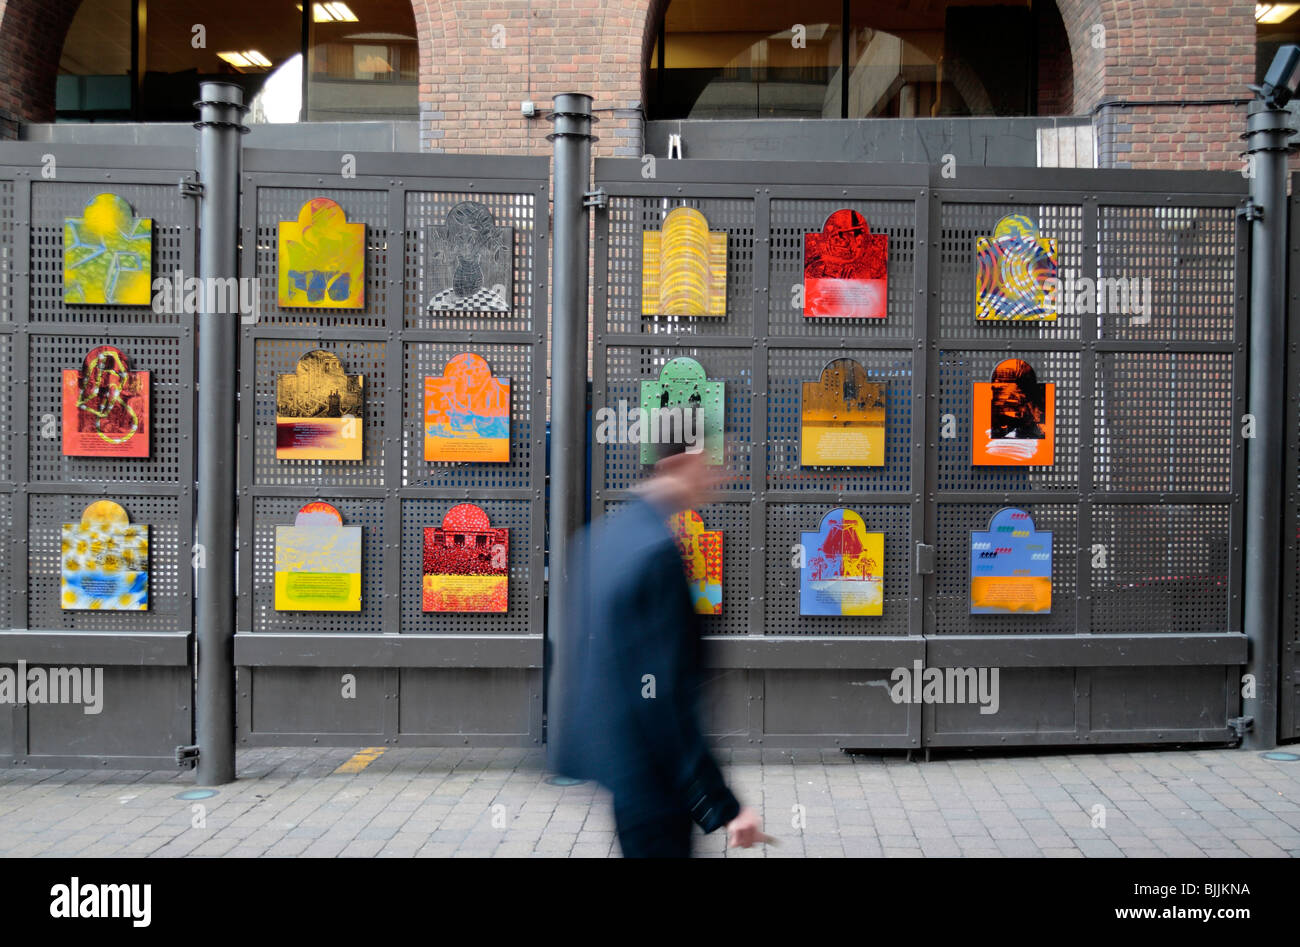 A man walking past a collection of colourful information plaques/art by  Dale Devereux Barker, St Katherine's Dock, London, UK. Stock Photo